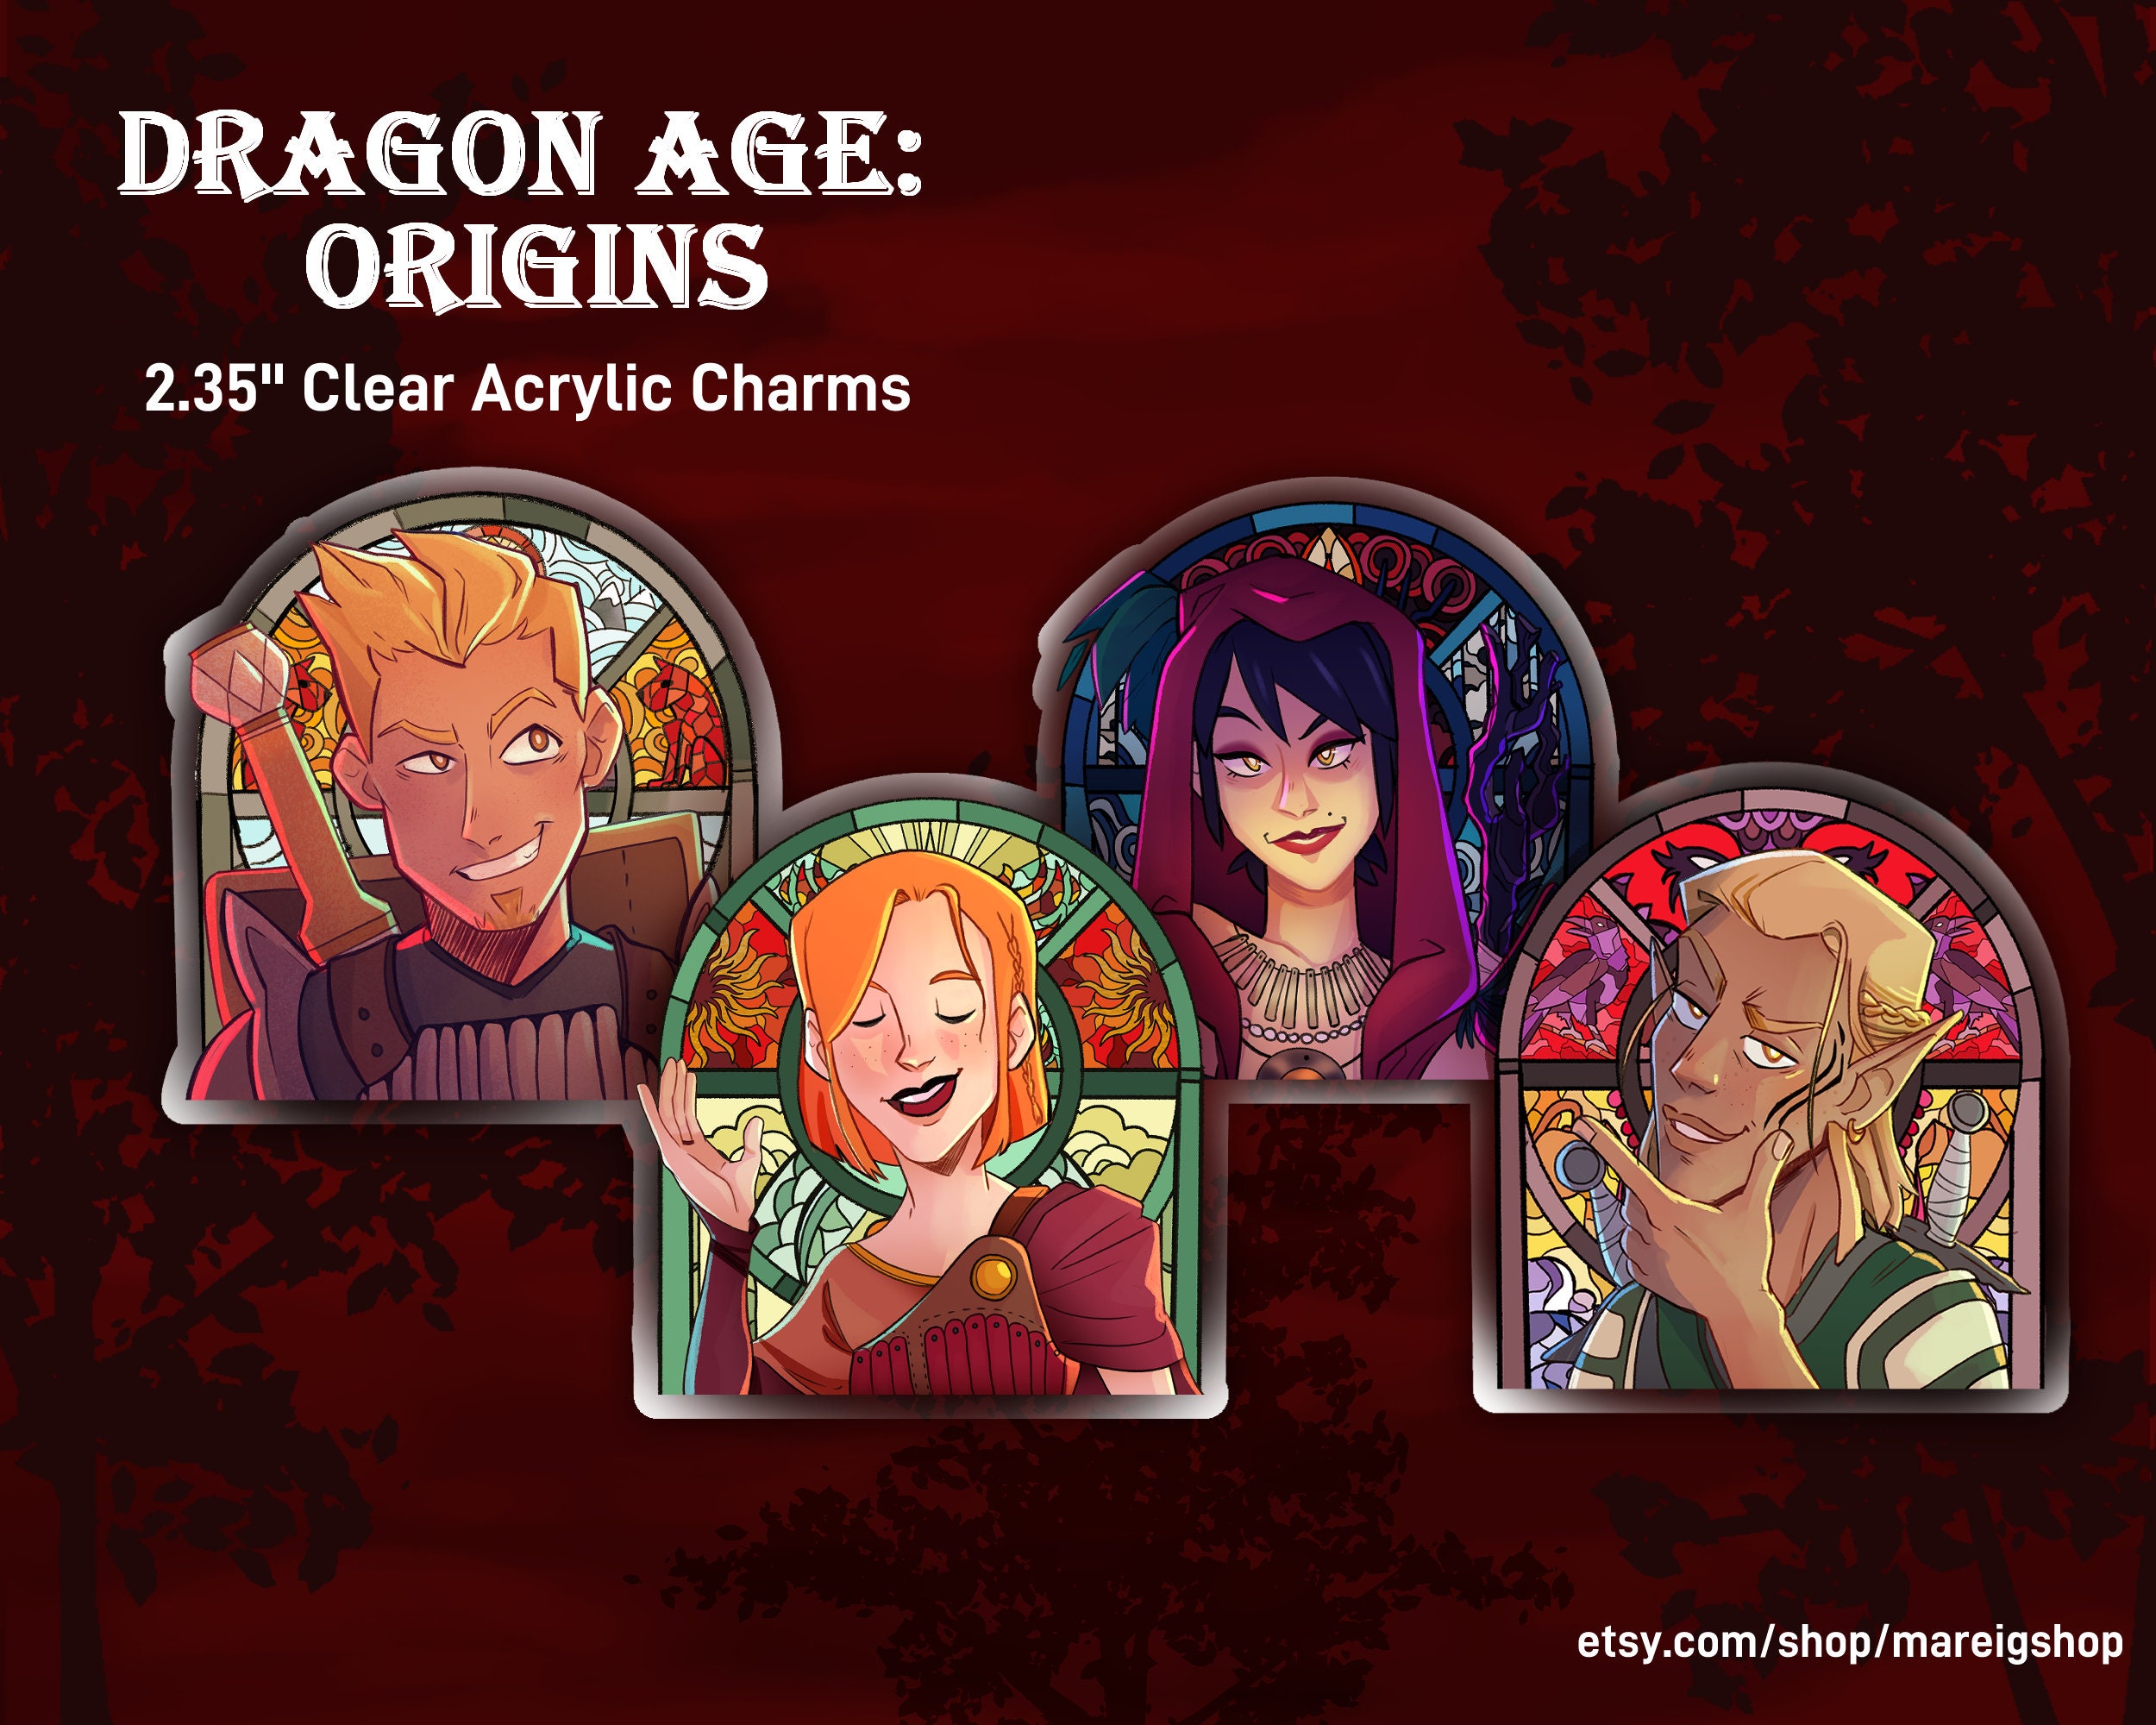 Dragon Age Origins Gifts & Merchandise for Sale